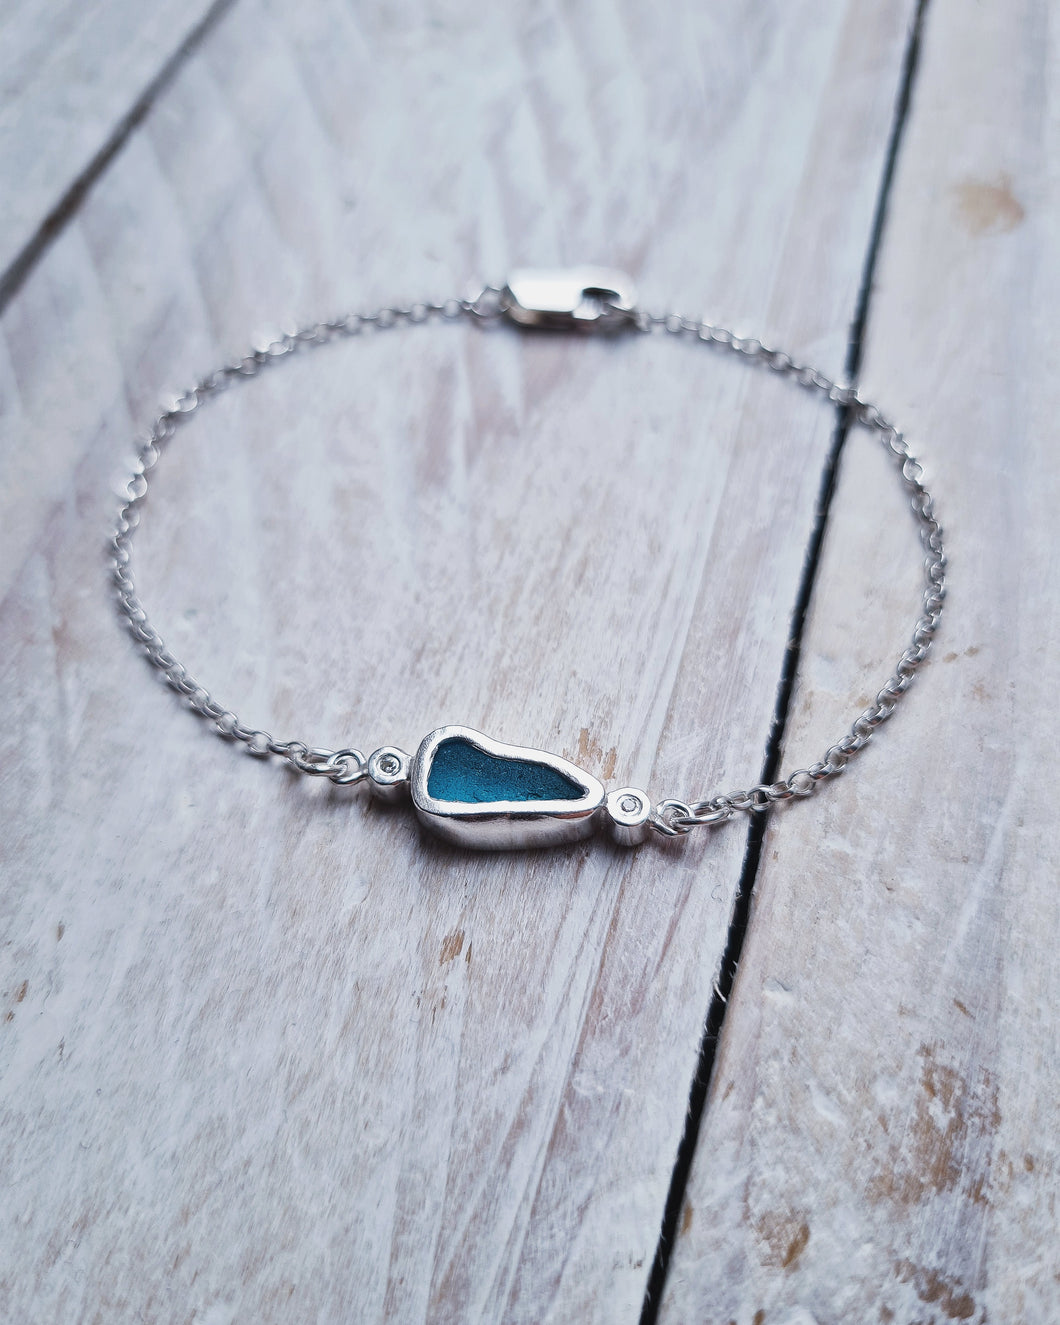 BESPOKE - Sea Glass Bezel Bracelet (No Diamond Option Also Available) in Sterling Silver or 9ct Gold